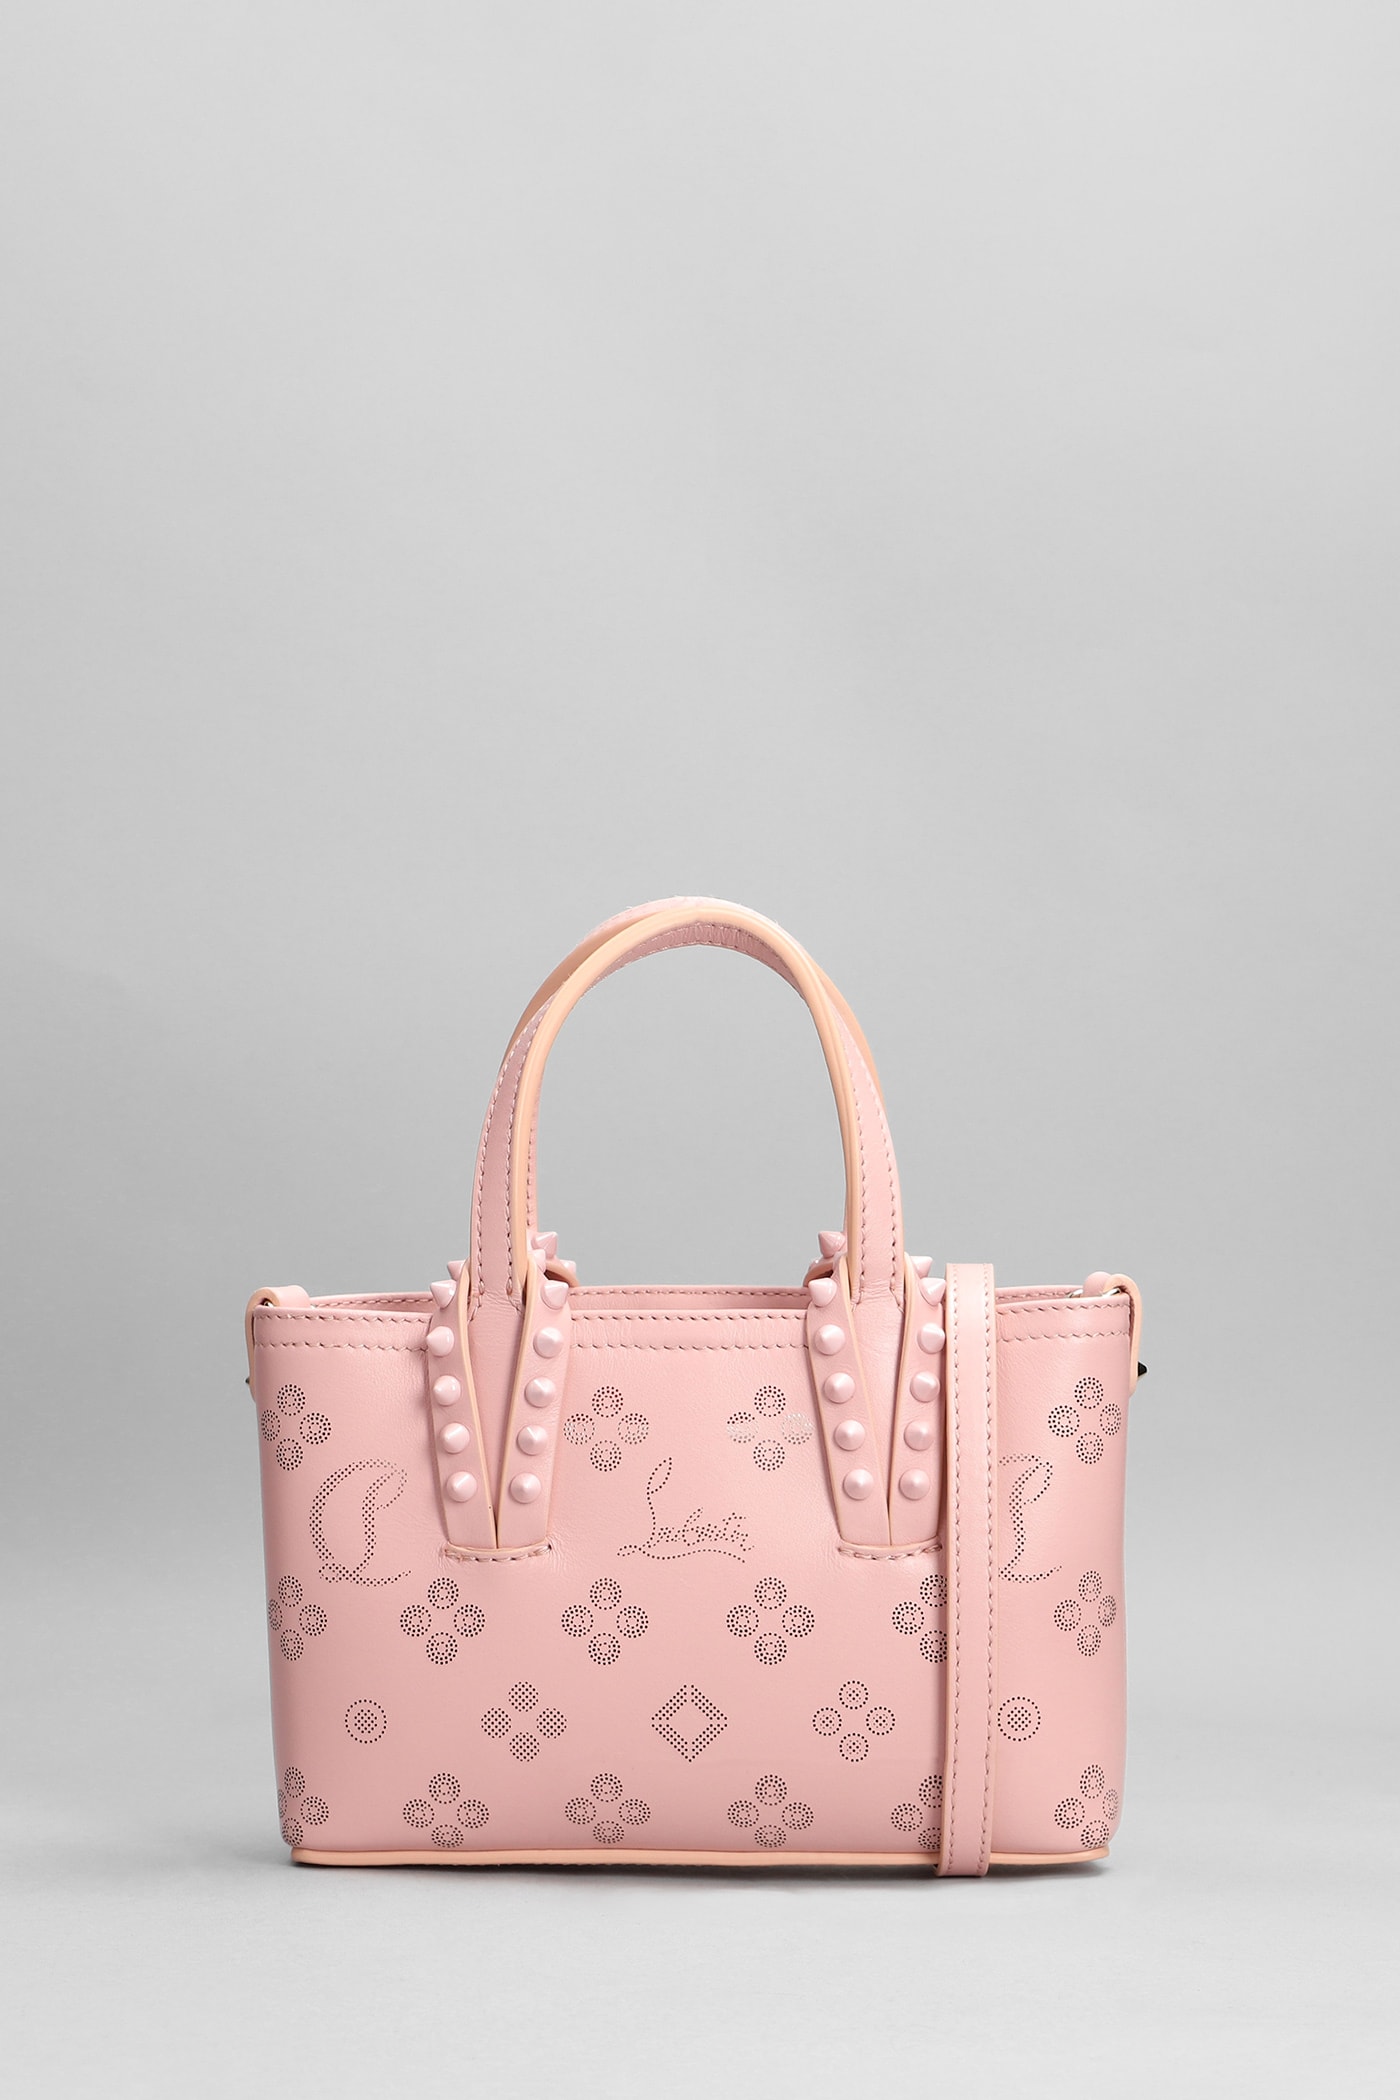 Christian Louboutin Cabata Nano Tote In Rose-pink Leather